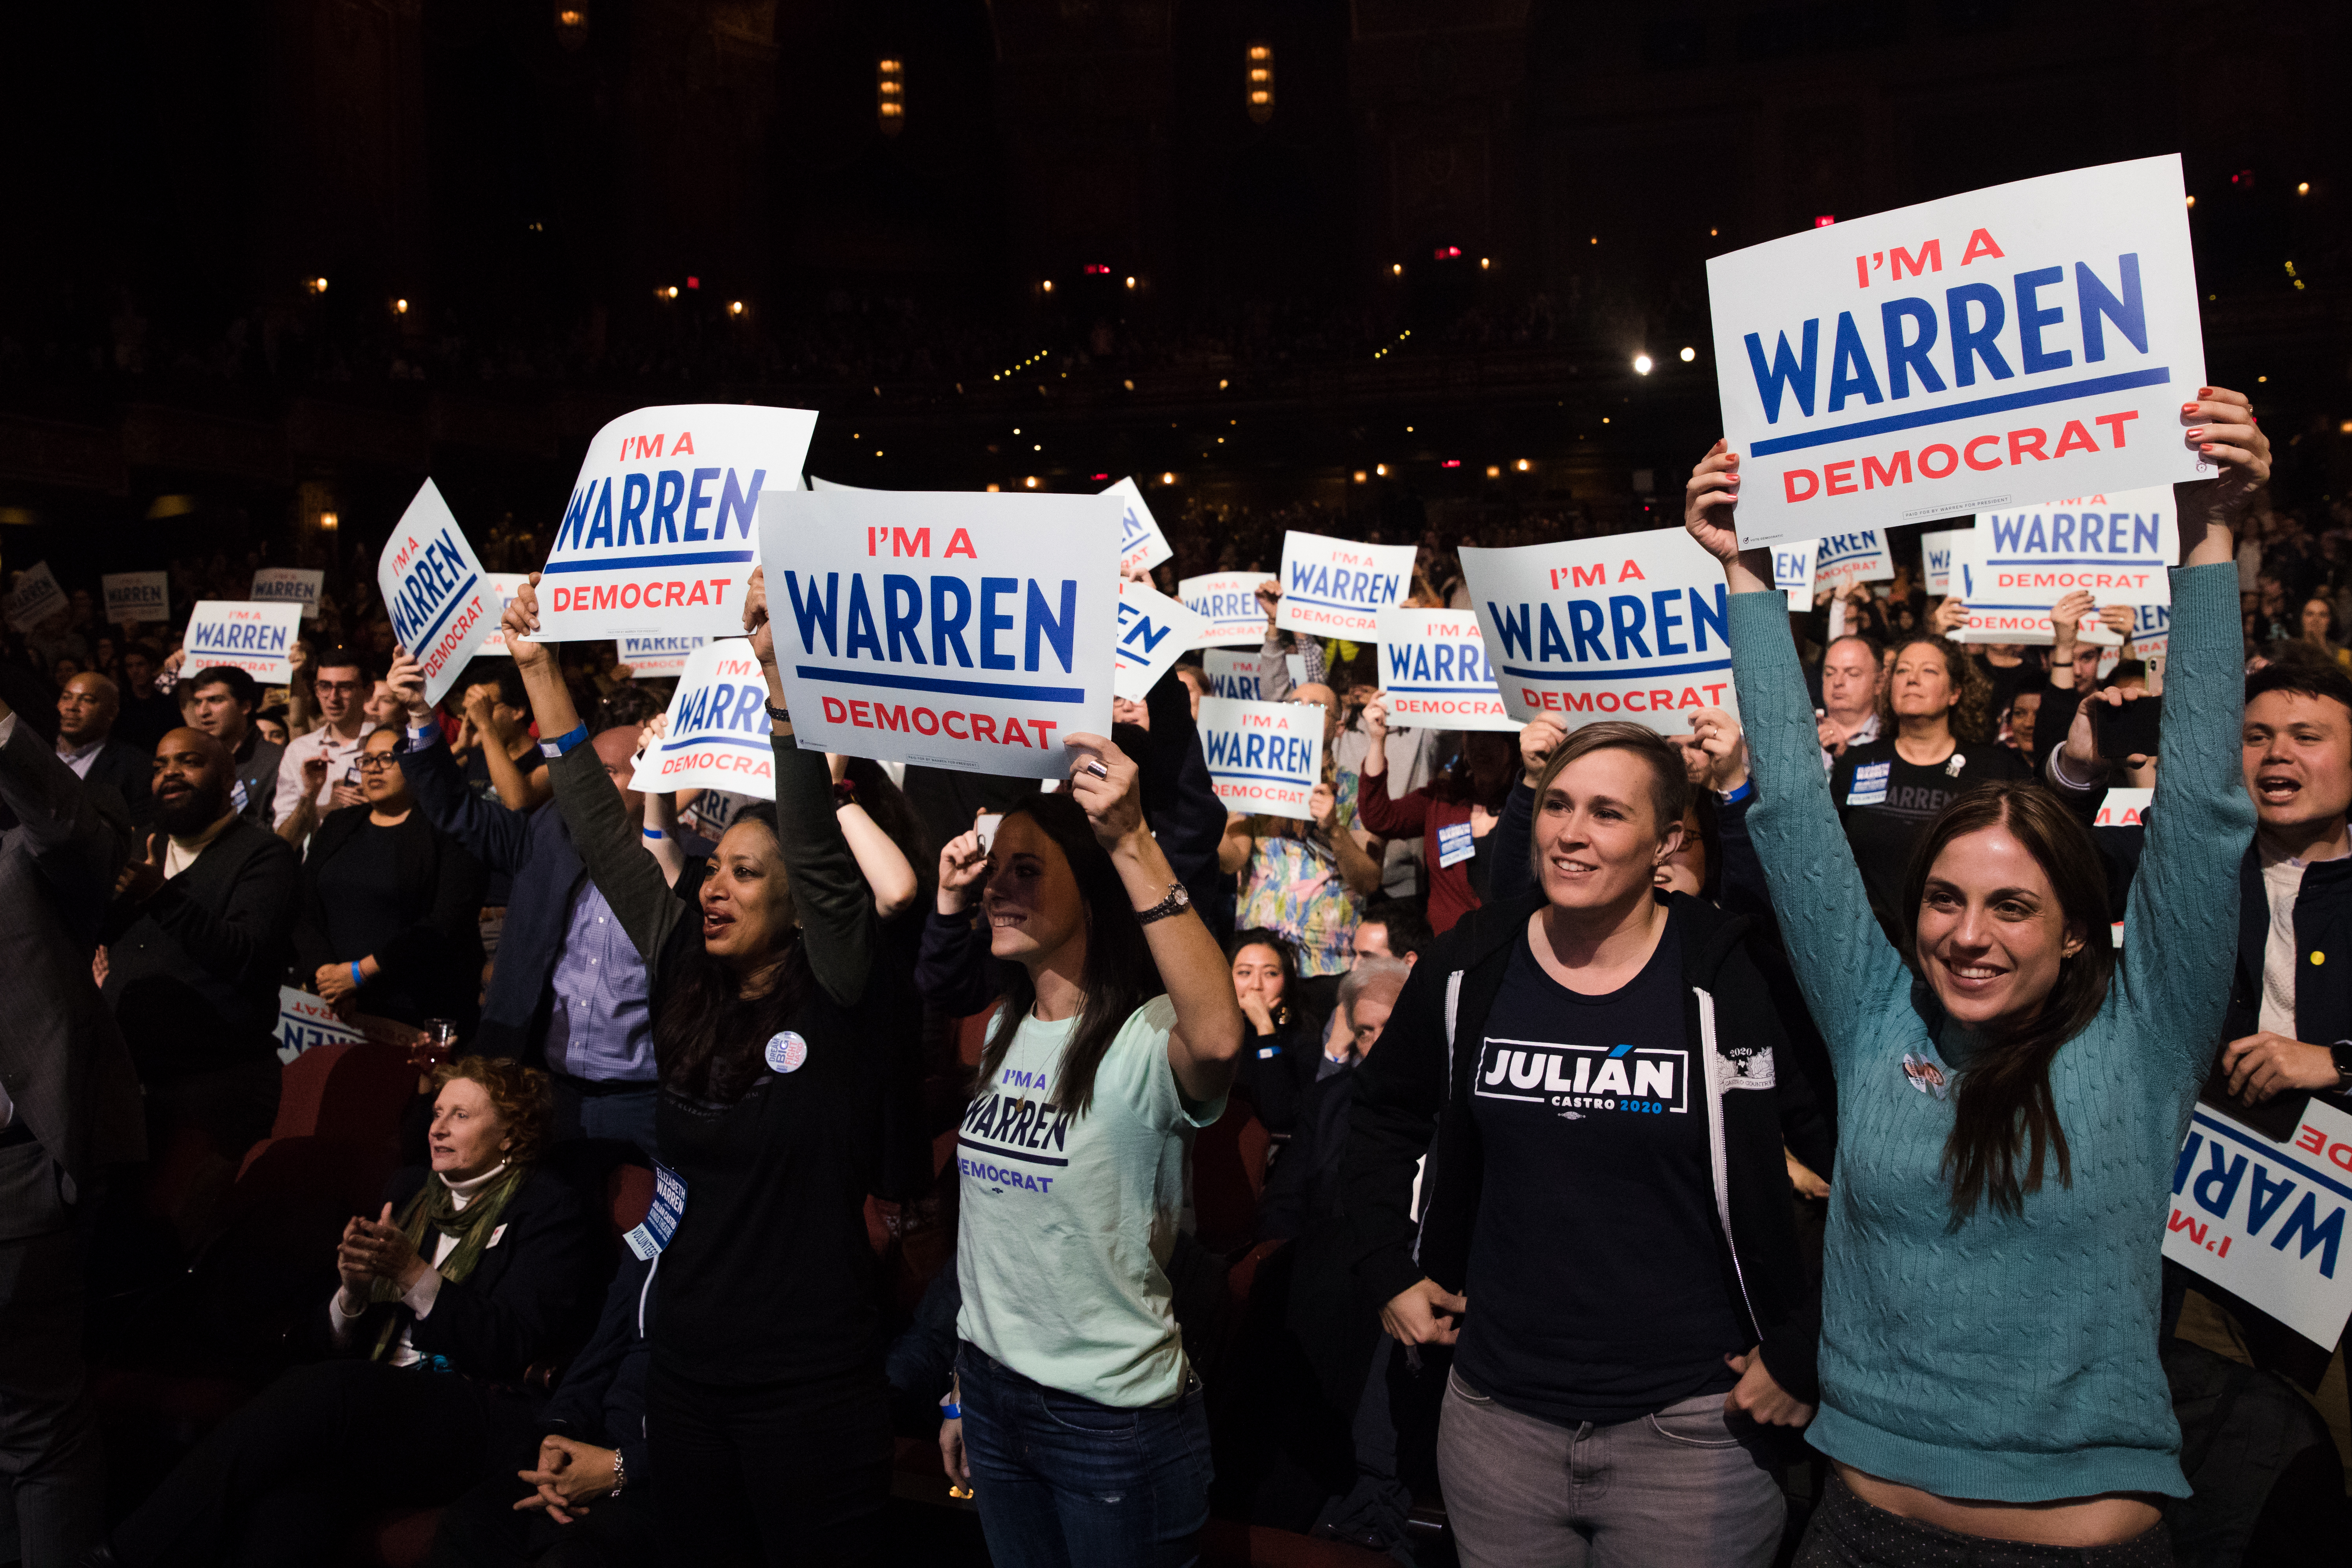 The crowd repeatedly jumped out of their chairs to cheer along during Warren's speech.